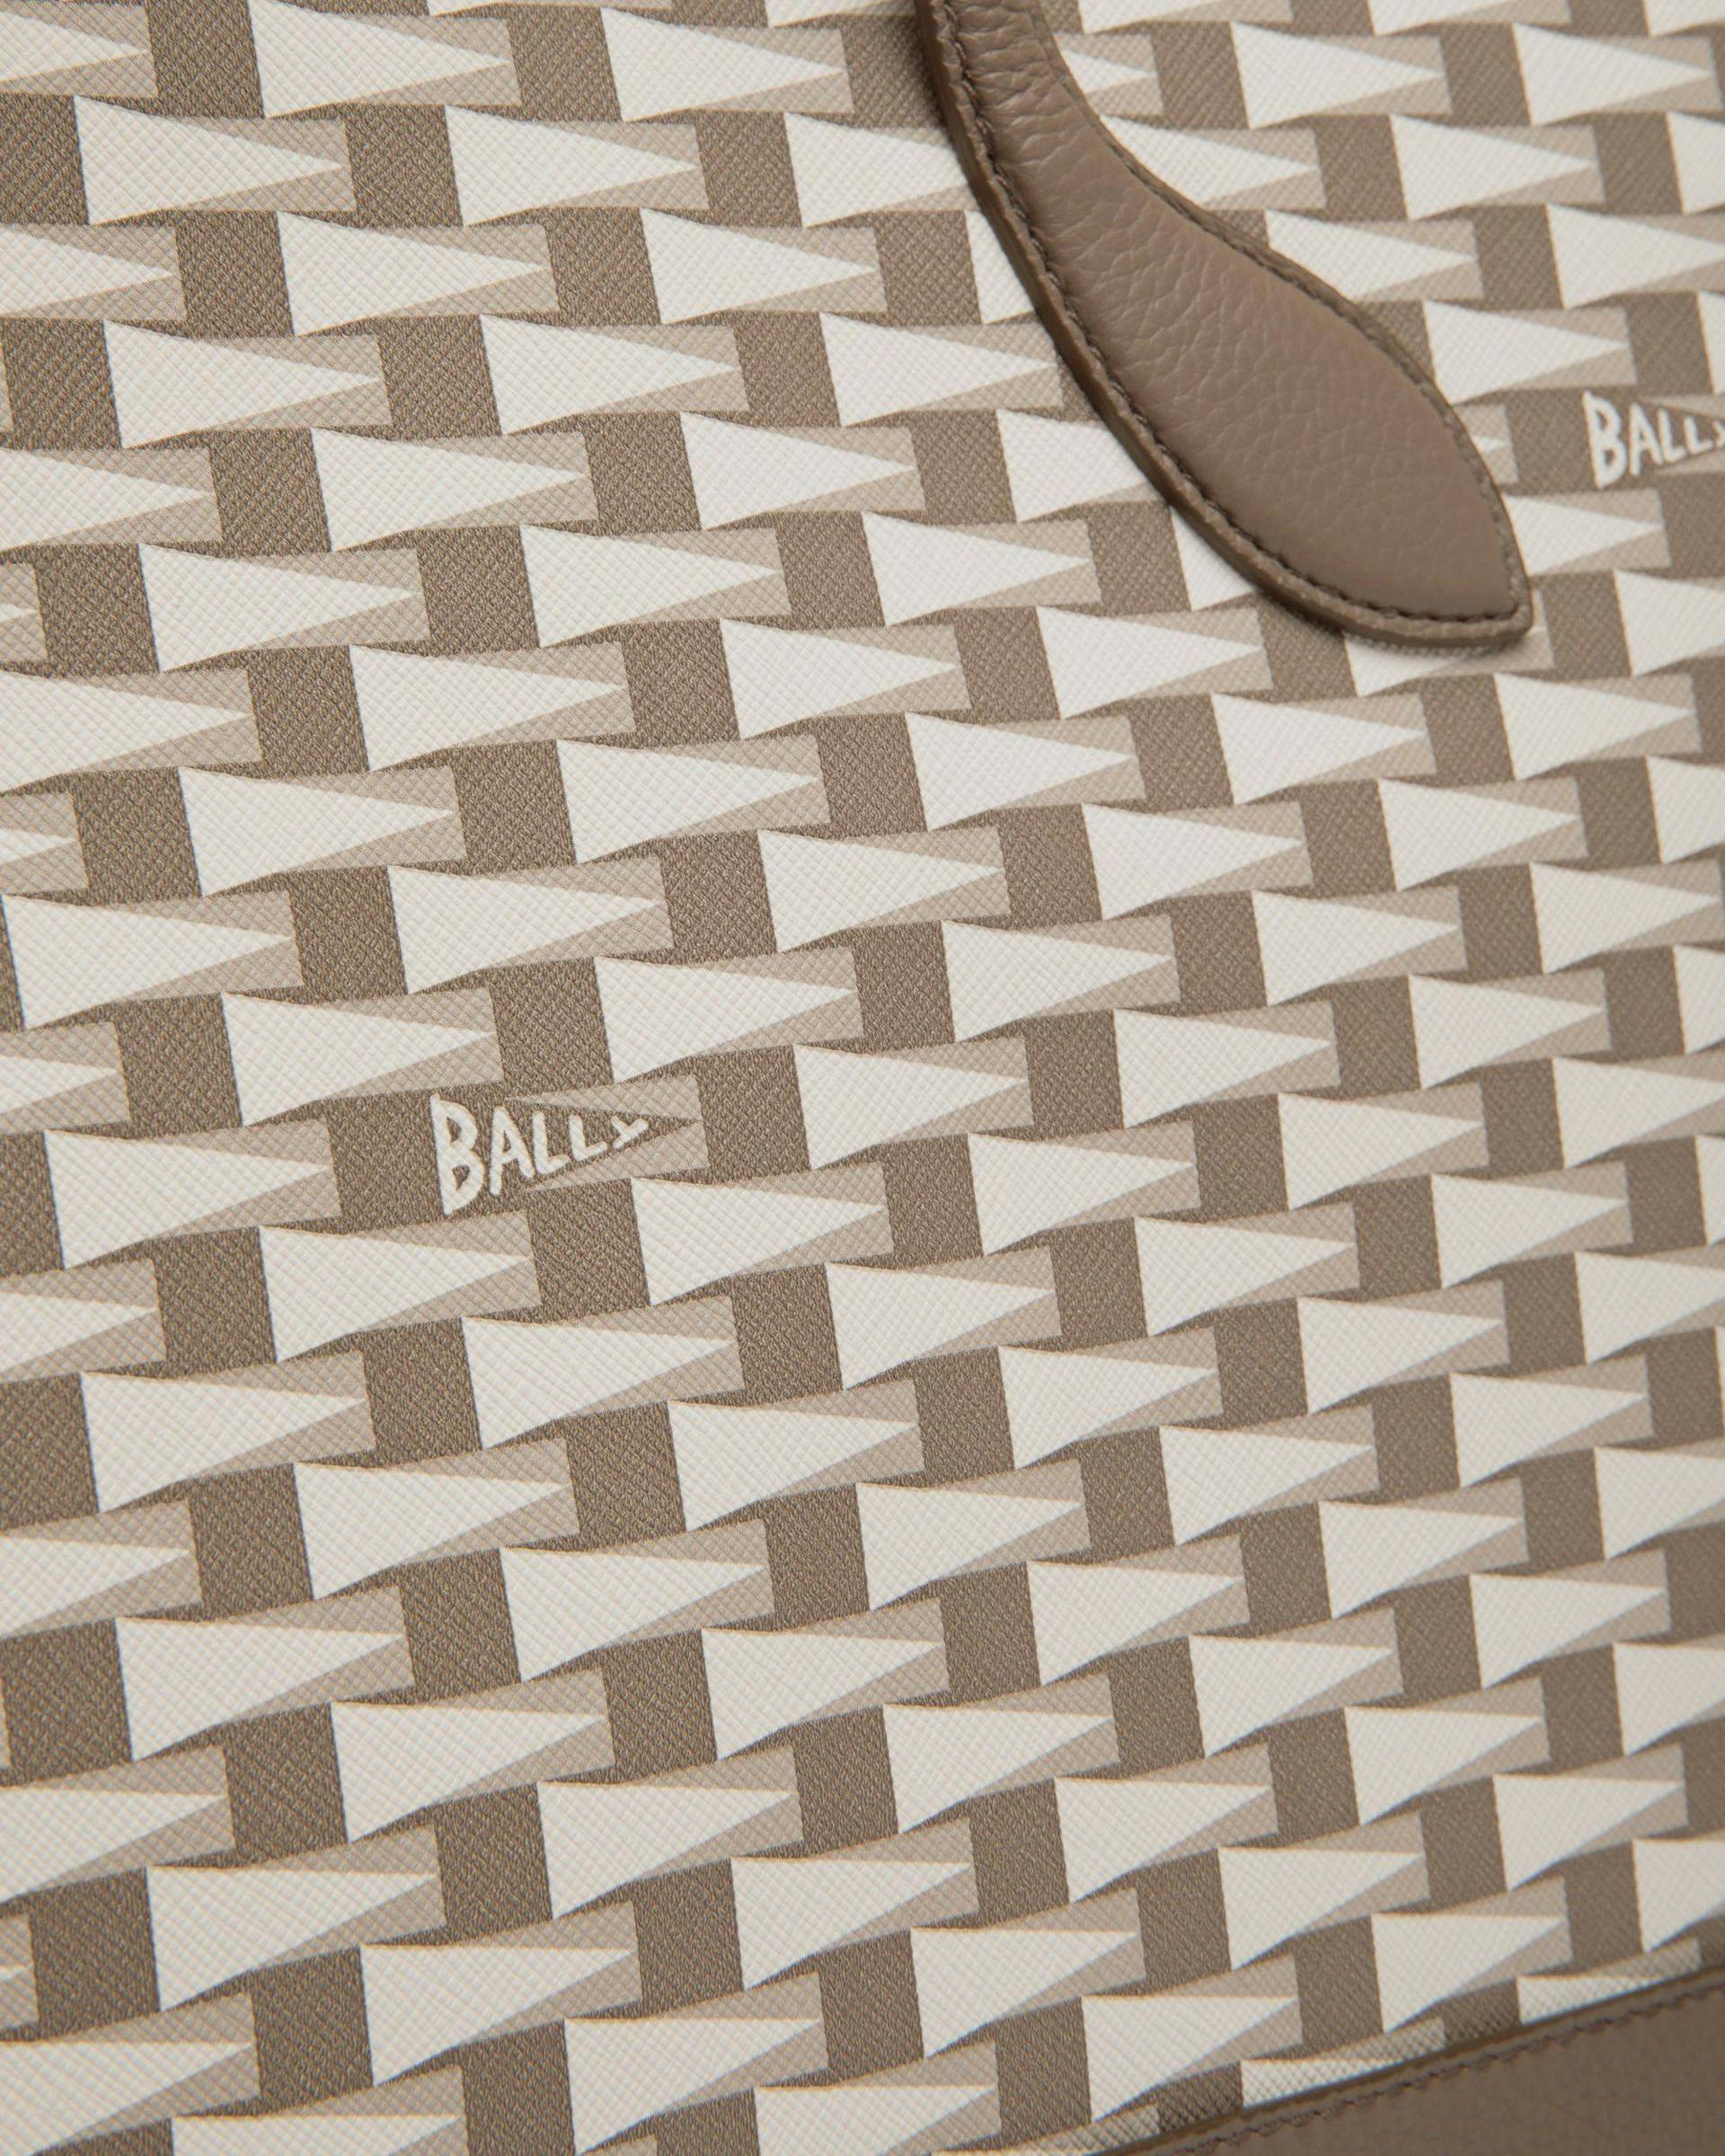 Women's Pennant Tote Bag in TPU | Bally | Still Life Detail